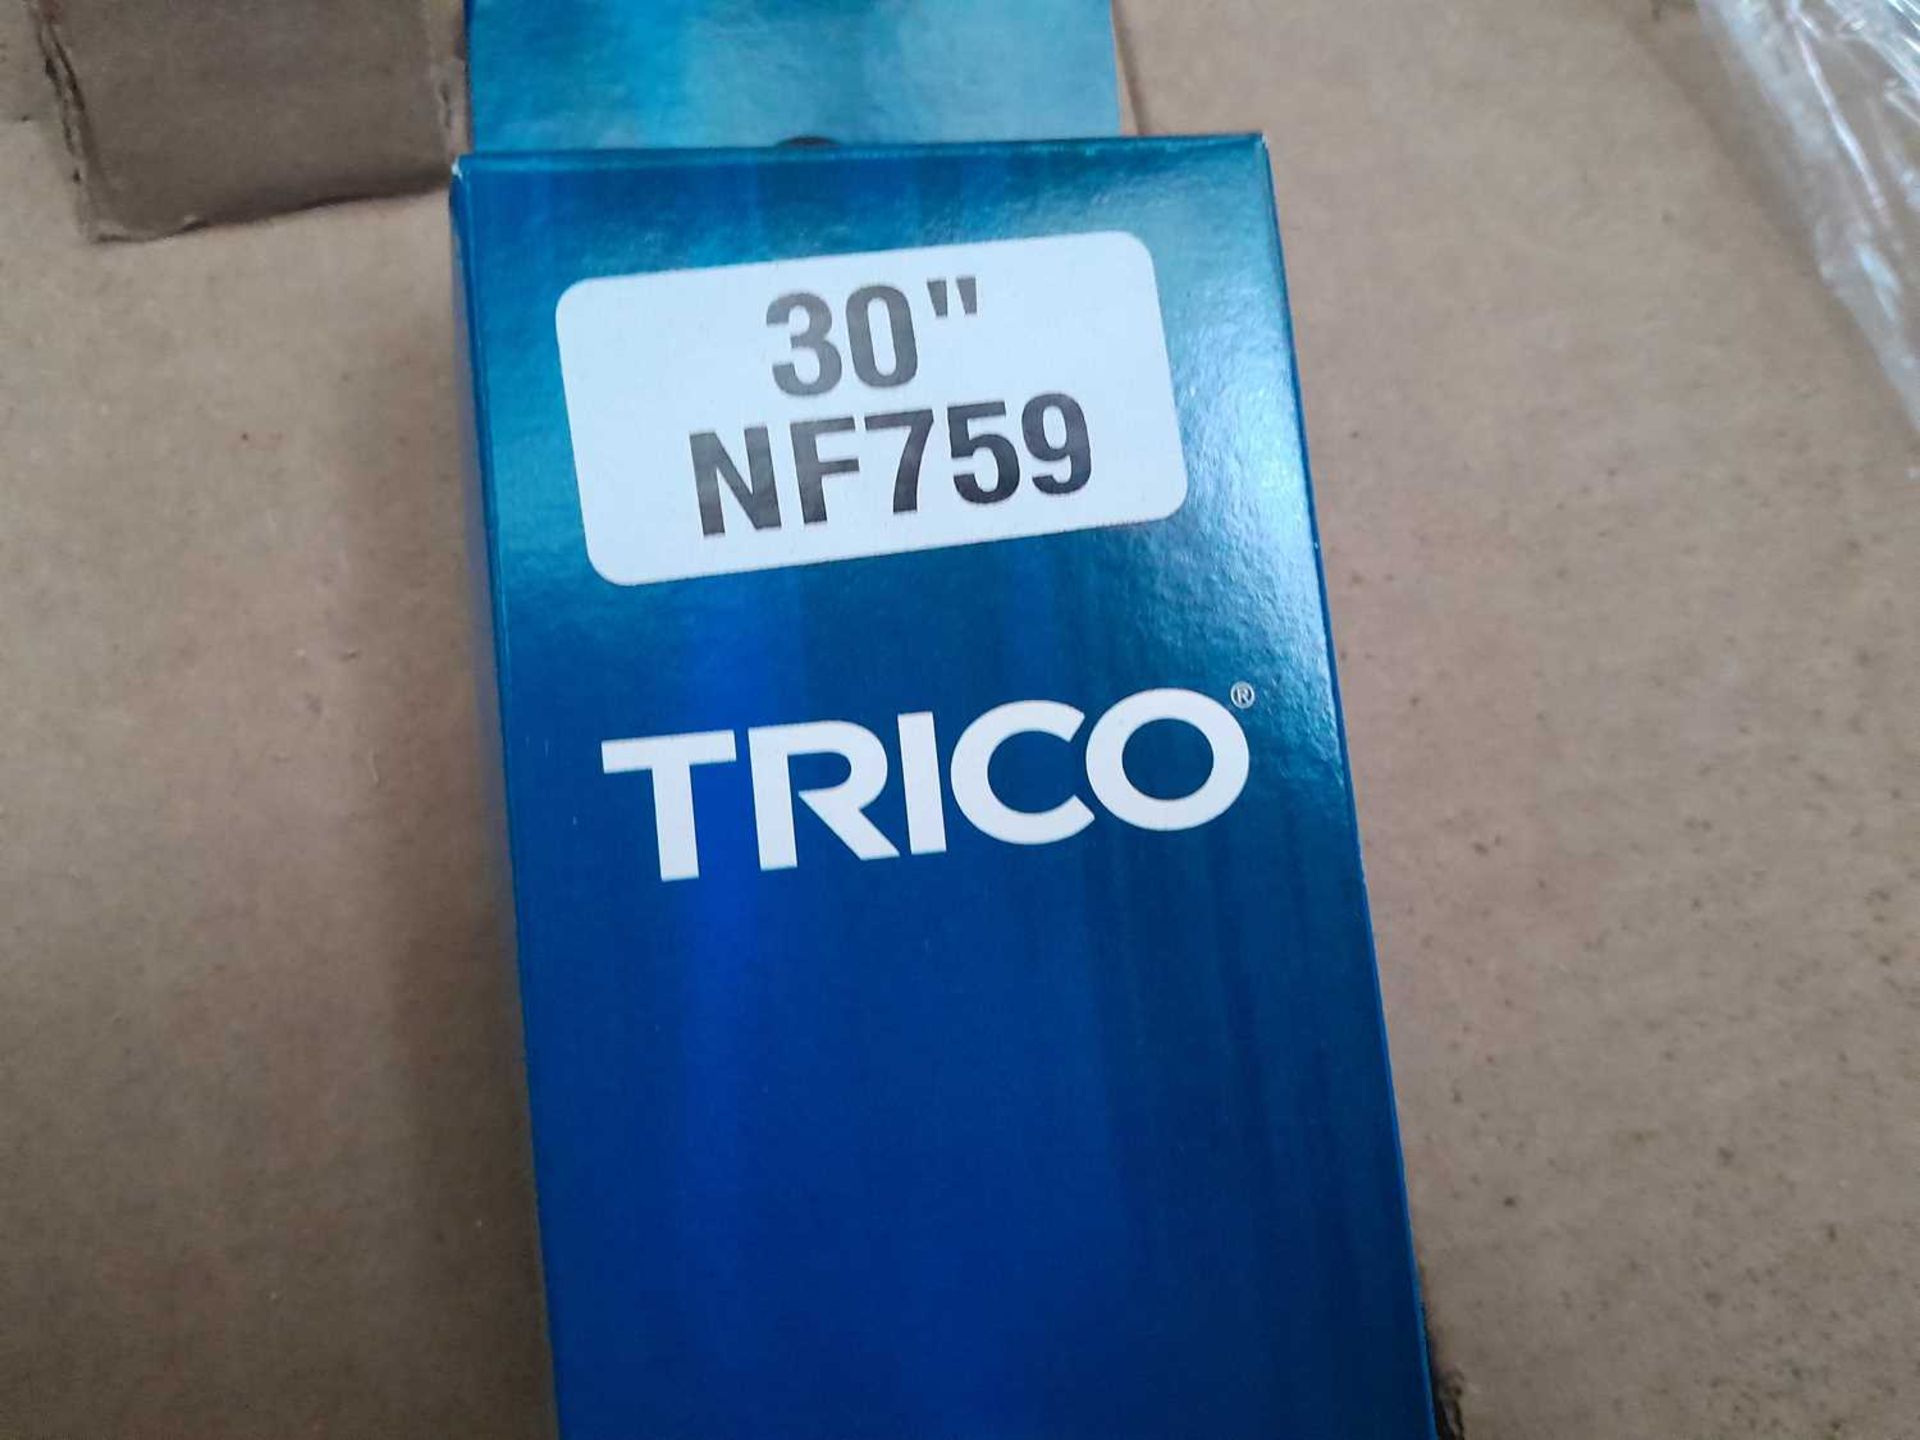 Unused Pallet of Trico NF759 Windscreen Wipers (30") - Image 2 of 3